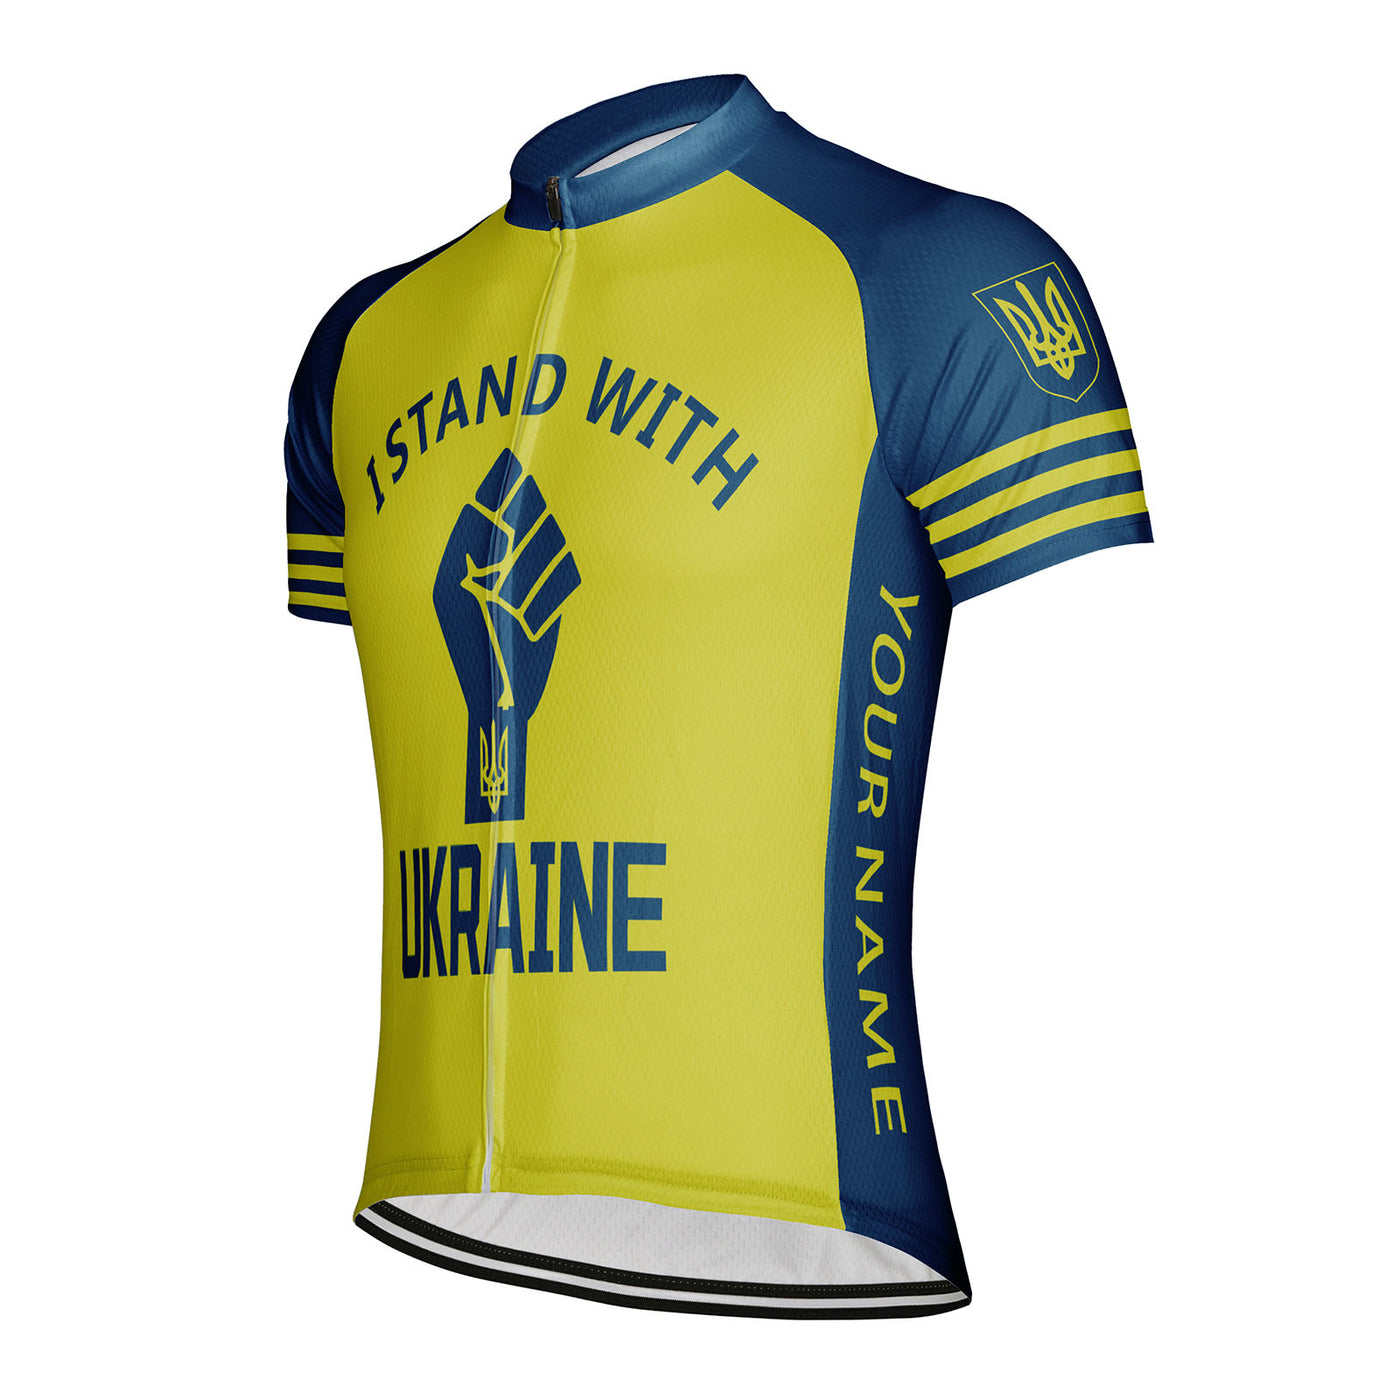 Customized I Stand With Ukraine Men's Cycling Jersey Short Sleeve